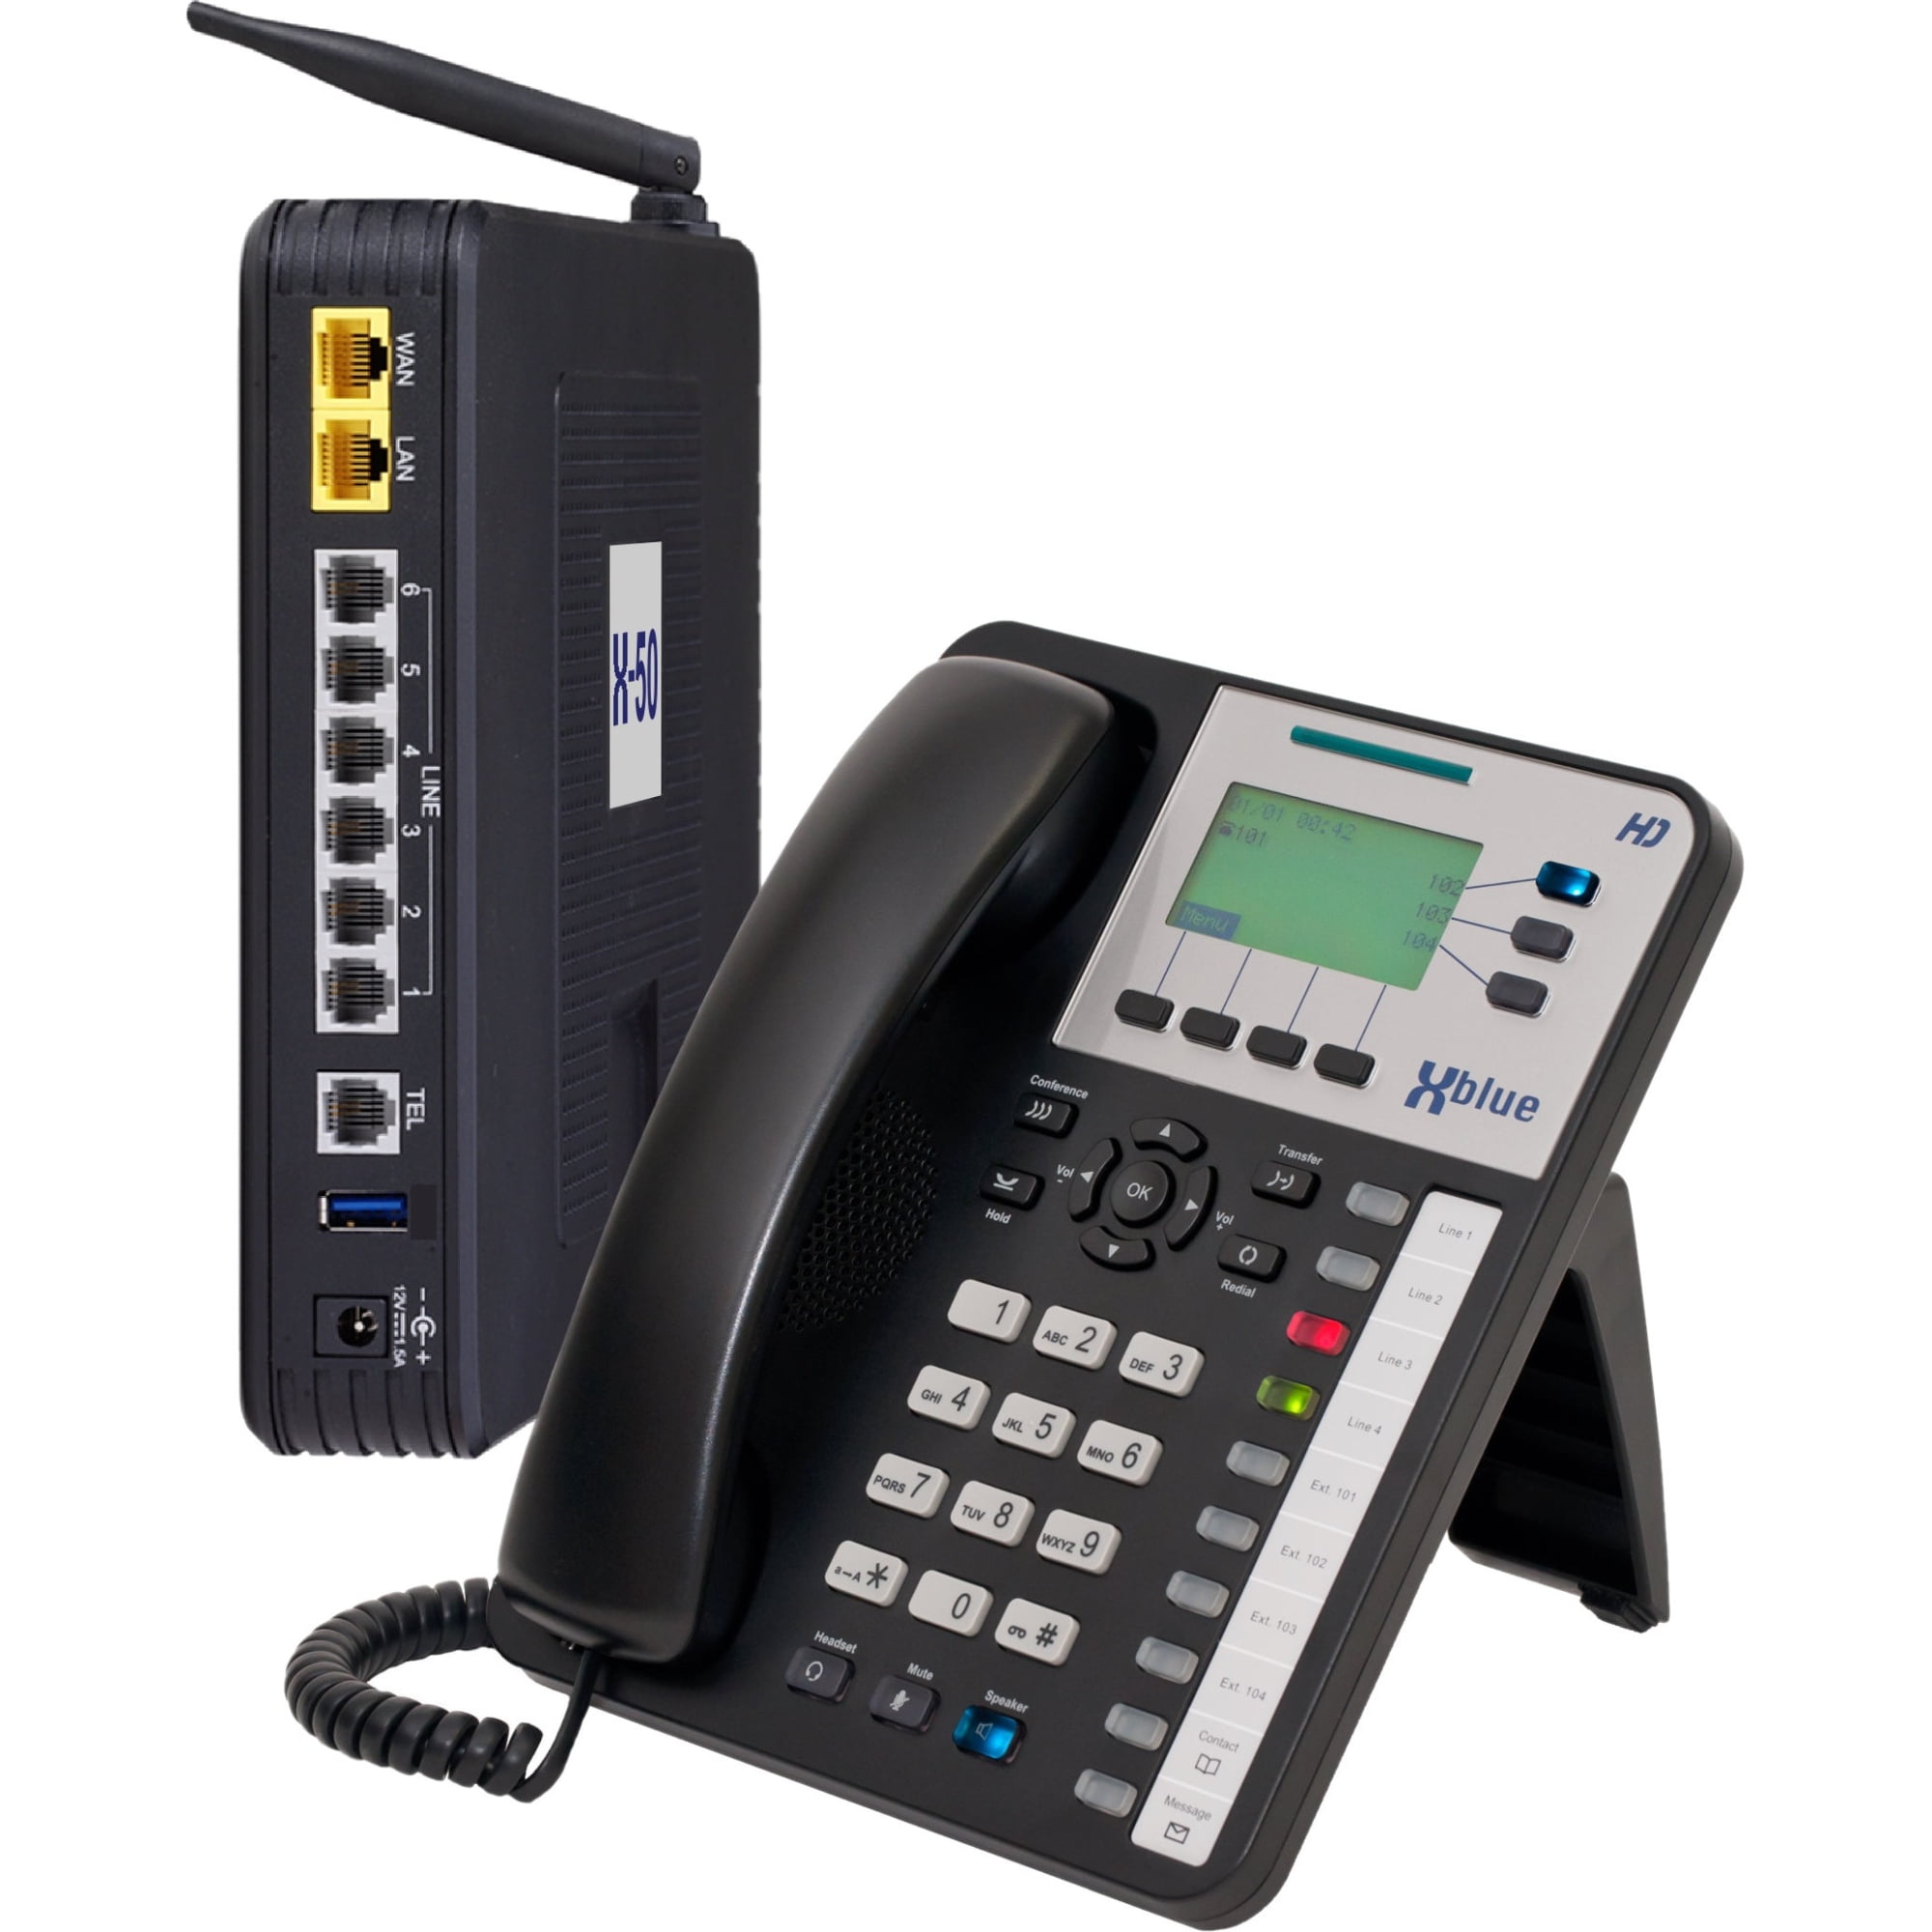 w/ 12 50 Phone & 18 Outside Line Capacity Voicemail X3030 IP Phones XBLUE X50XL System X50XL12 Auto Attendant